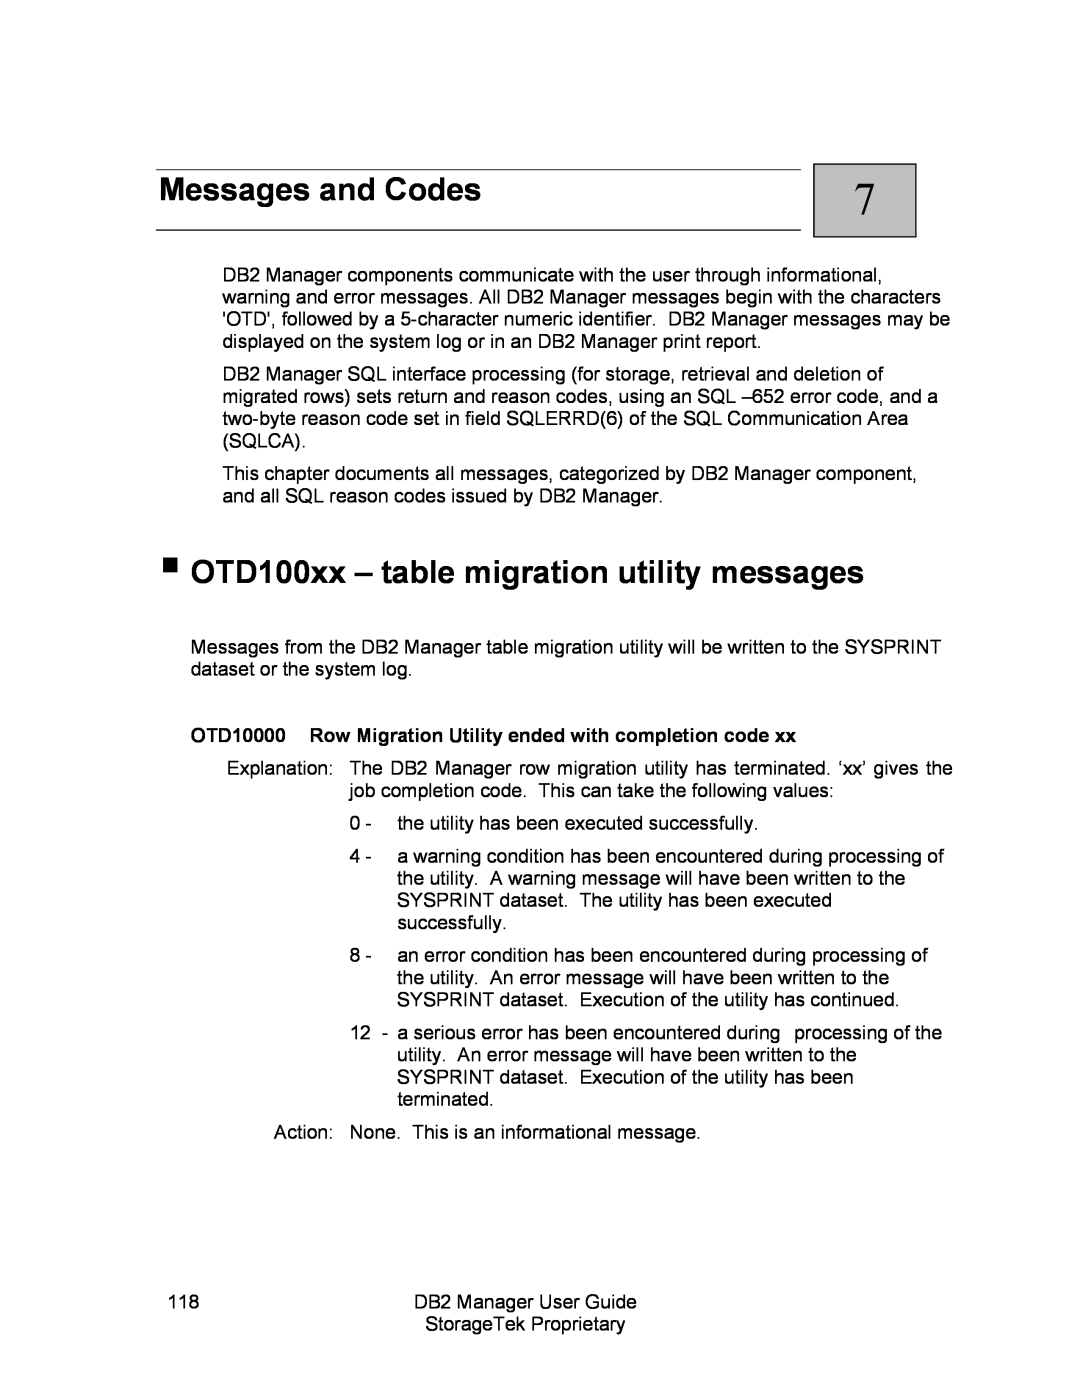 StorageTek 312564001 manual Messages and Codes, OTD100xx – table migration utility messages 